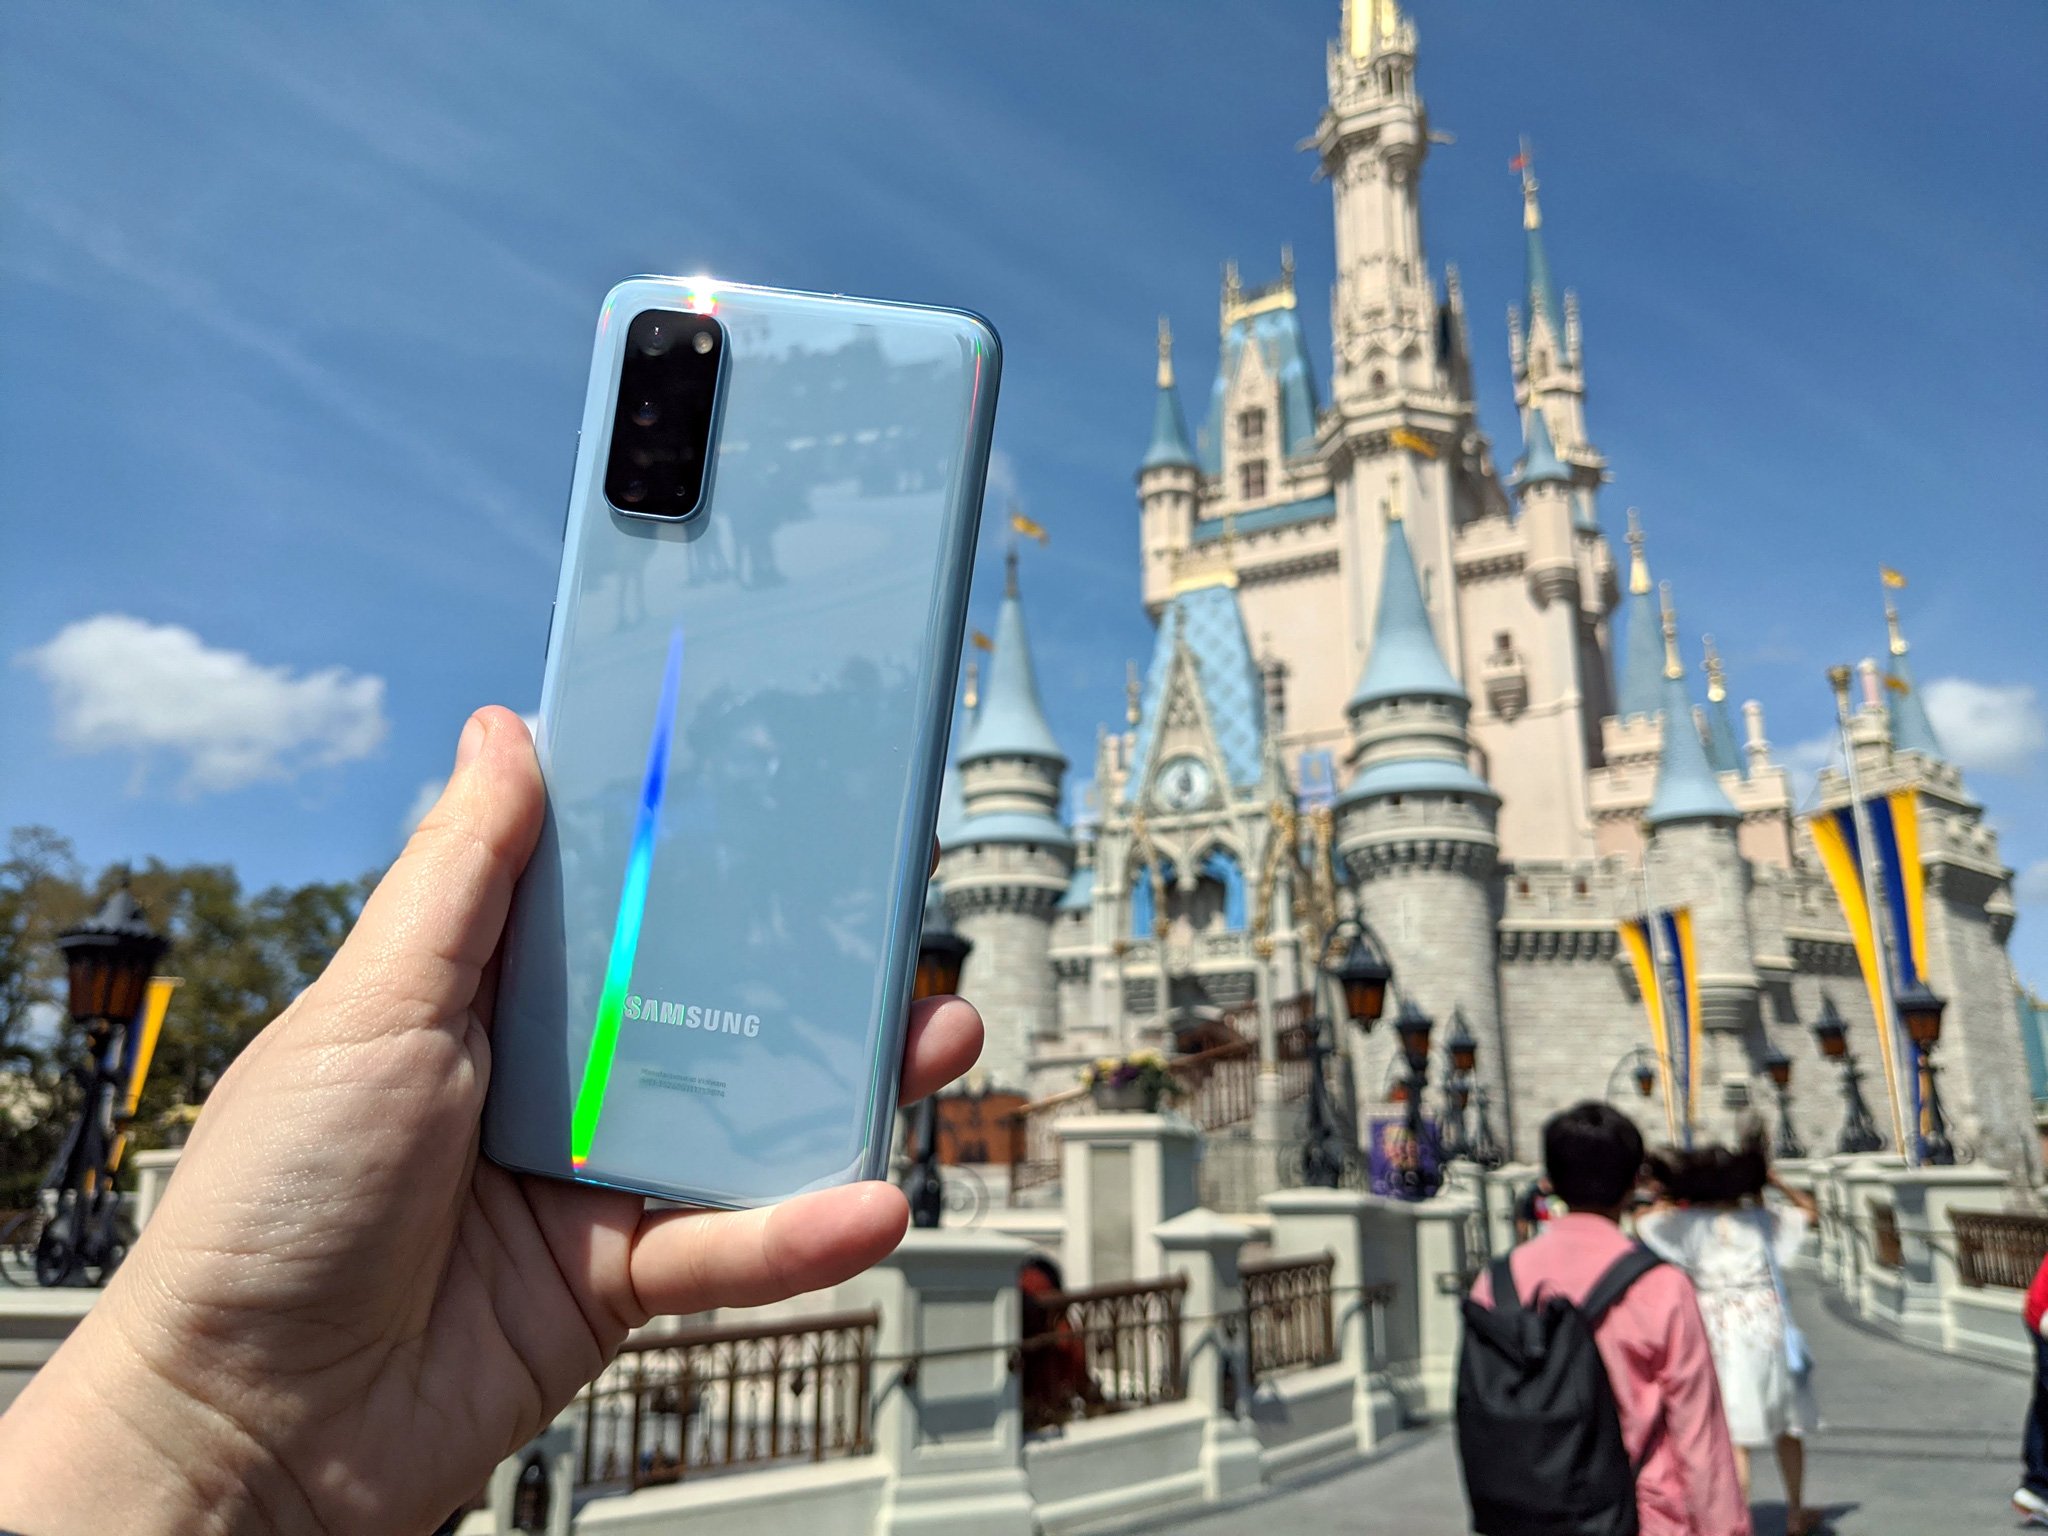 Galaxy S20 is a phone that's perfect for the parks